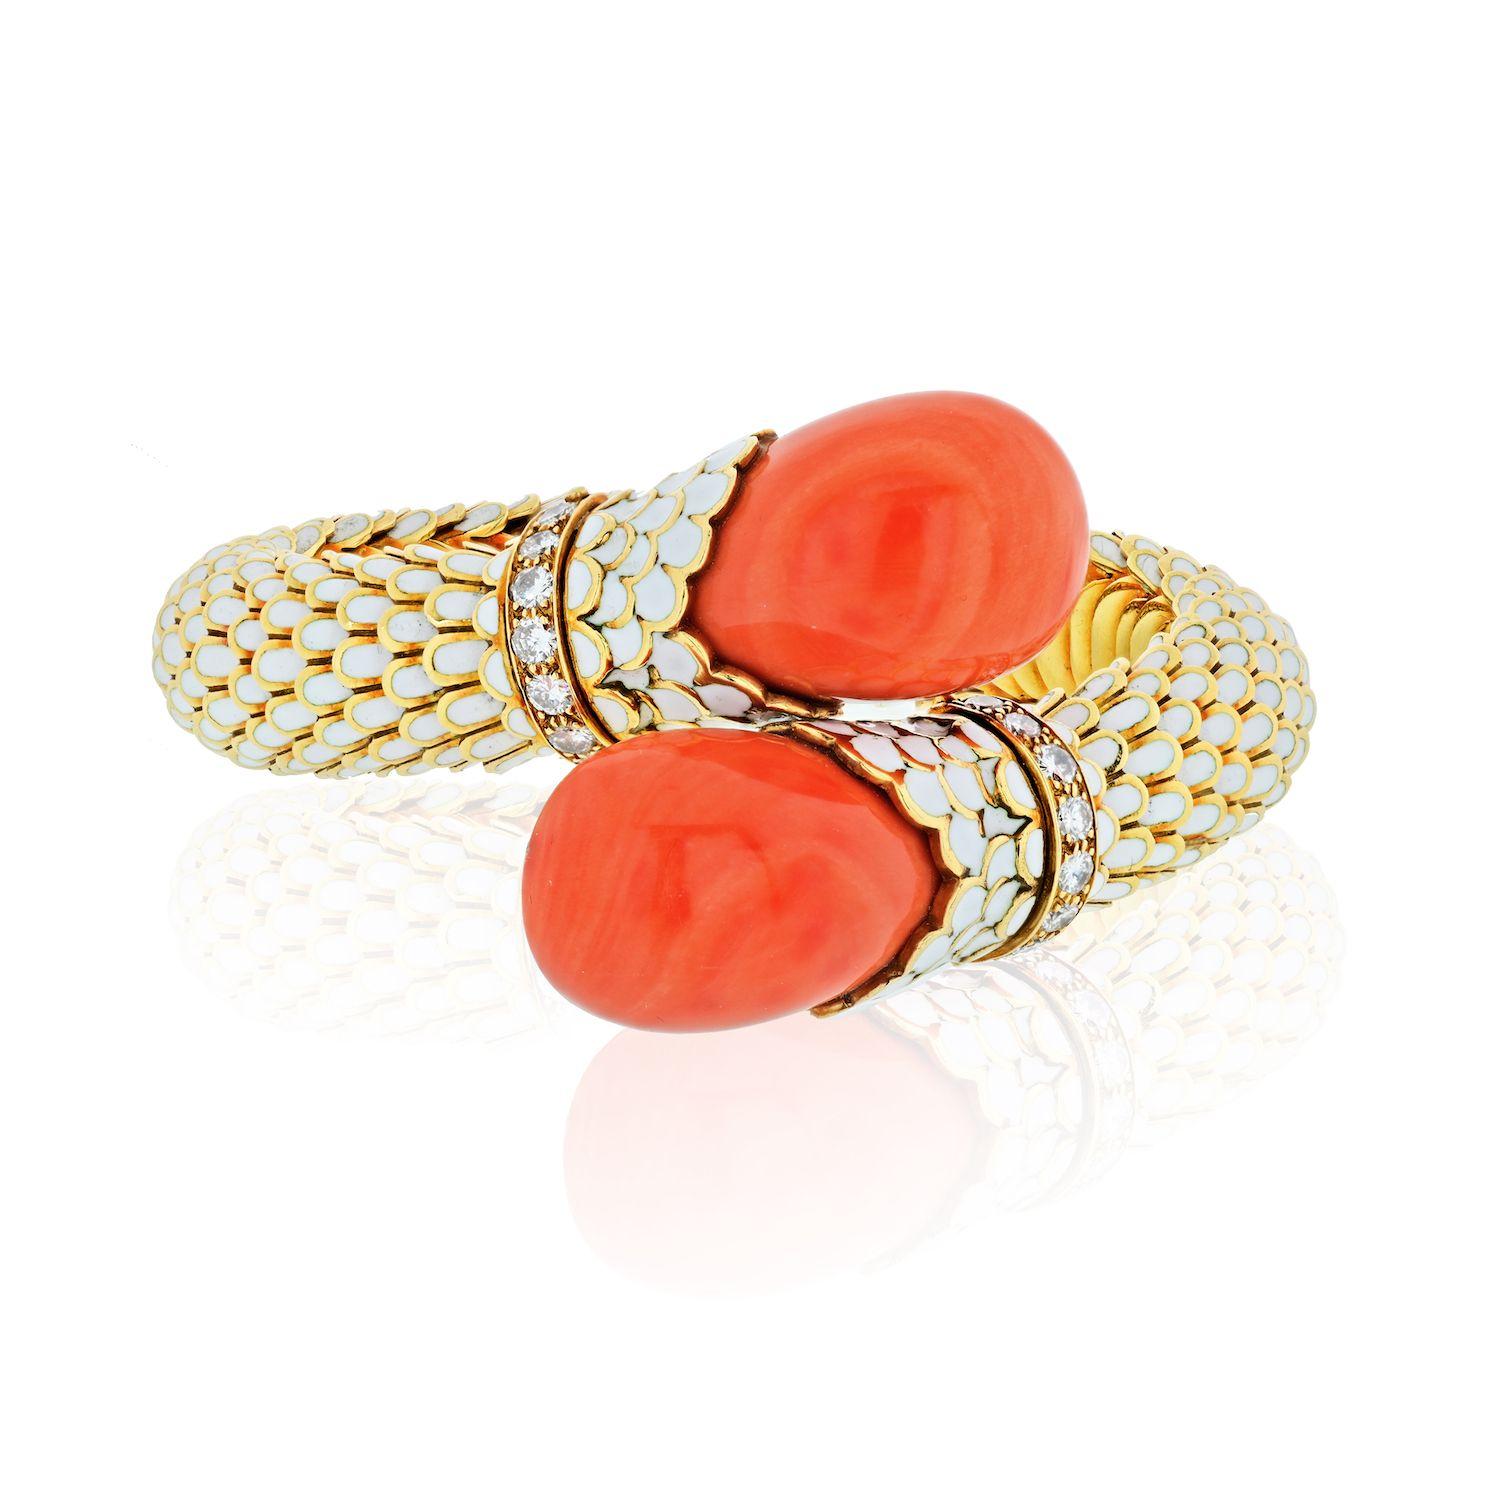 David Webb
Gold Coral Bypass Crossover White Enamel Diamond Bangle Circa 1965 Bracelet

A CORAL, ENAMEL AND DIAMOND BRACELET, BY DAVID WEBB

The flexible cross-over bangle designed as a series of scalloped links enhanced by white enamel and polished